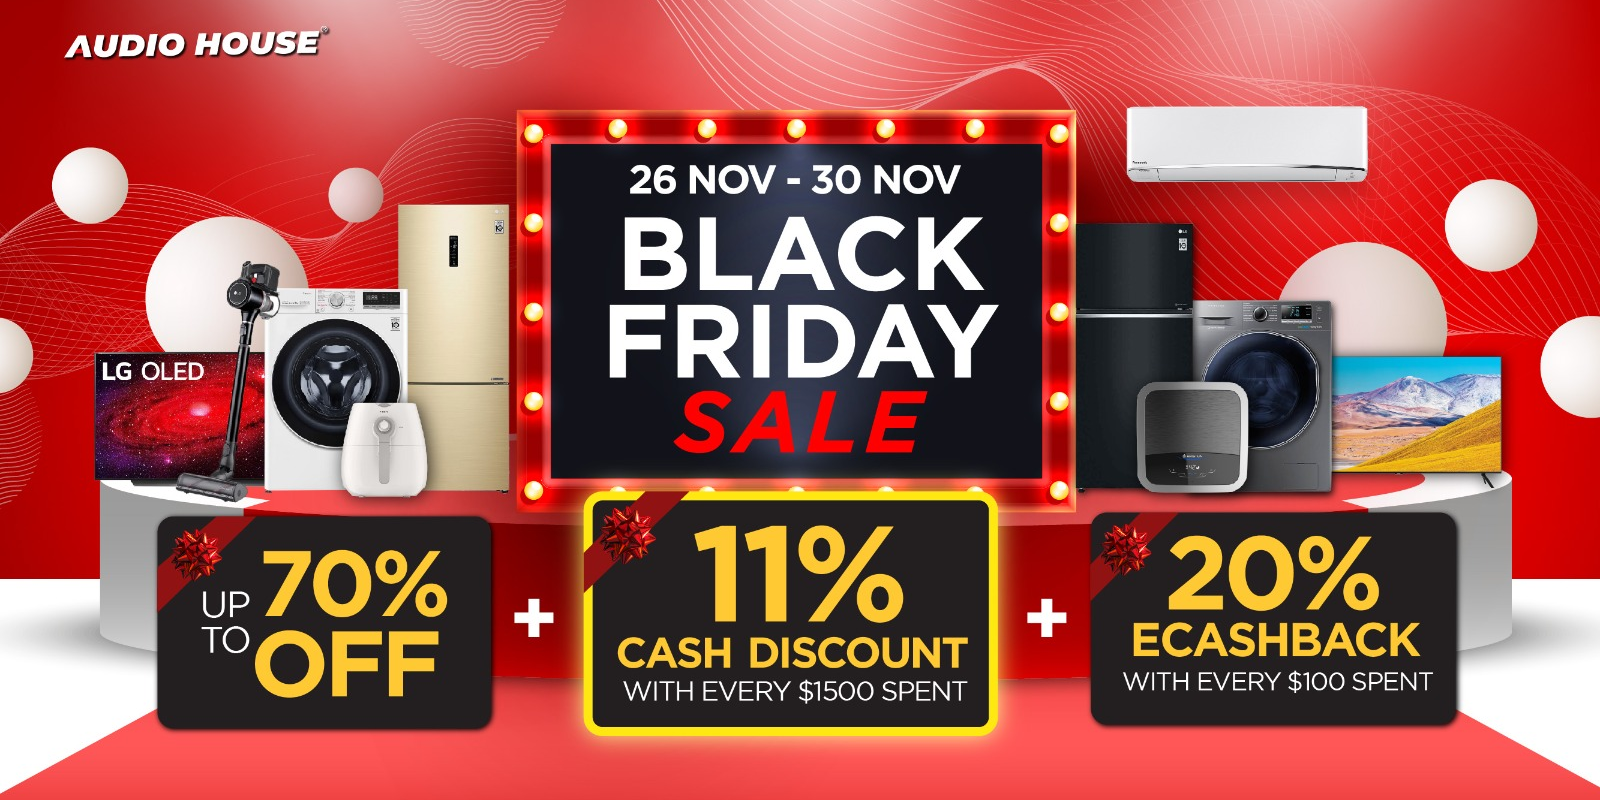 [Audio House Black Friday Sale] Up to 70% OFF + 11% cash discount with every $1,500 spent + 20% ecas